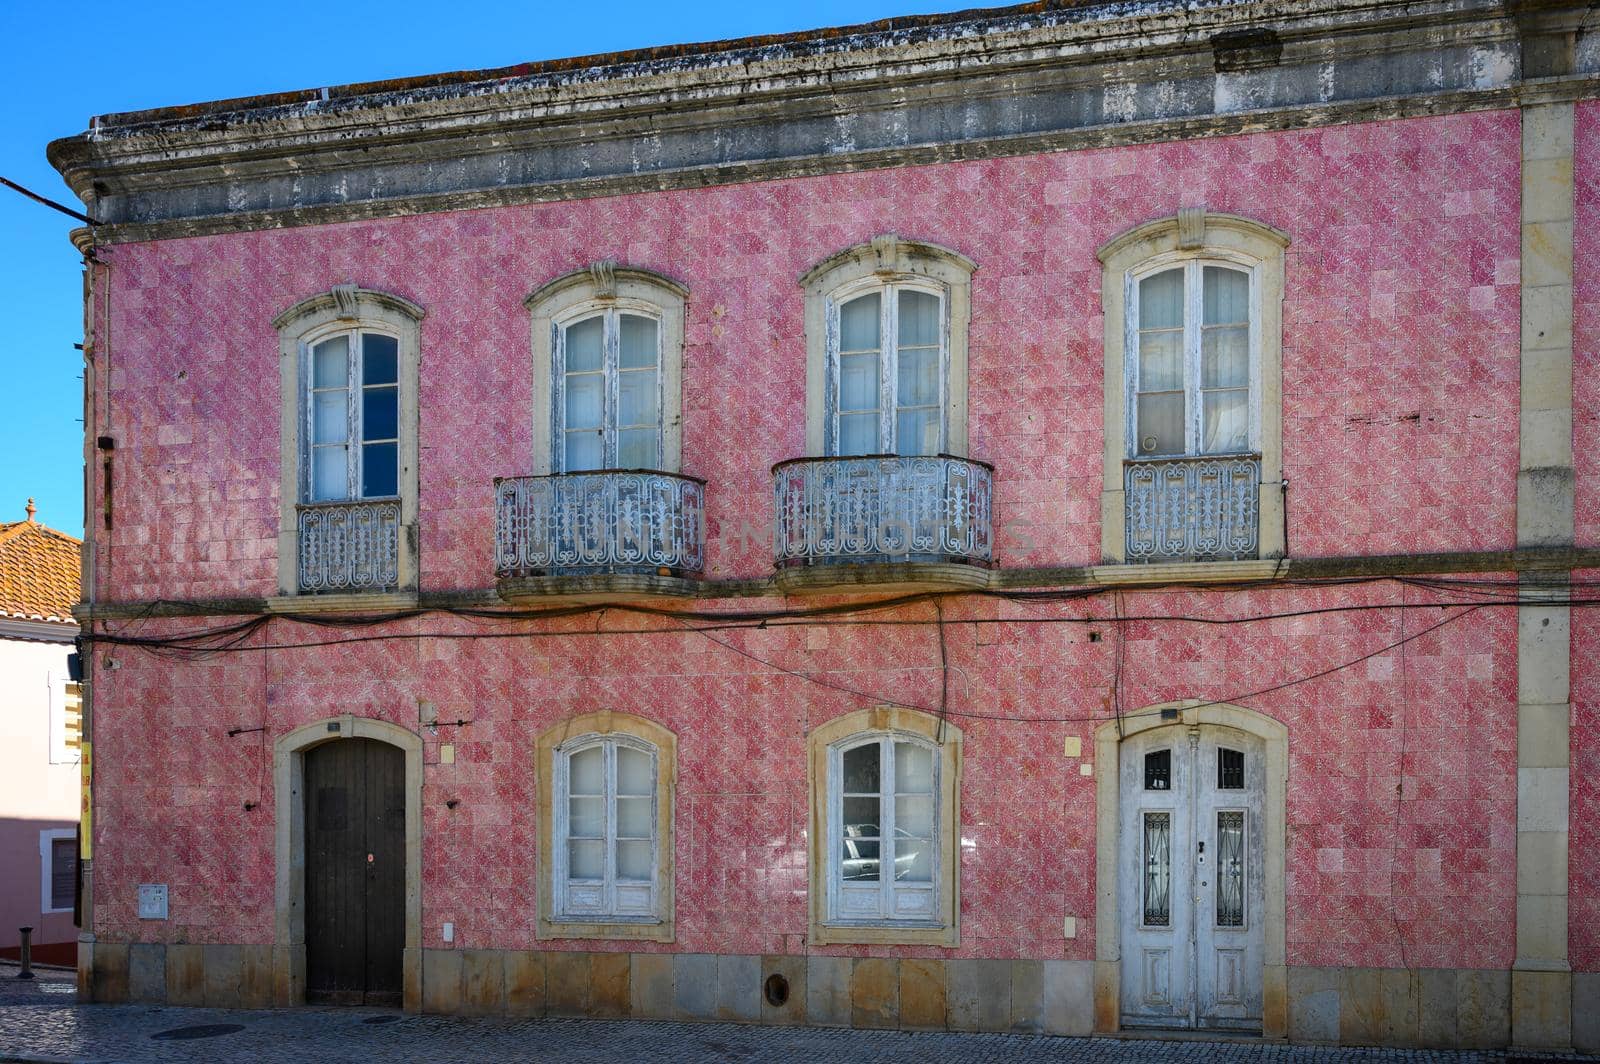 An old red-tiled house in a small Portuguese town.